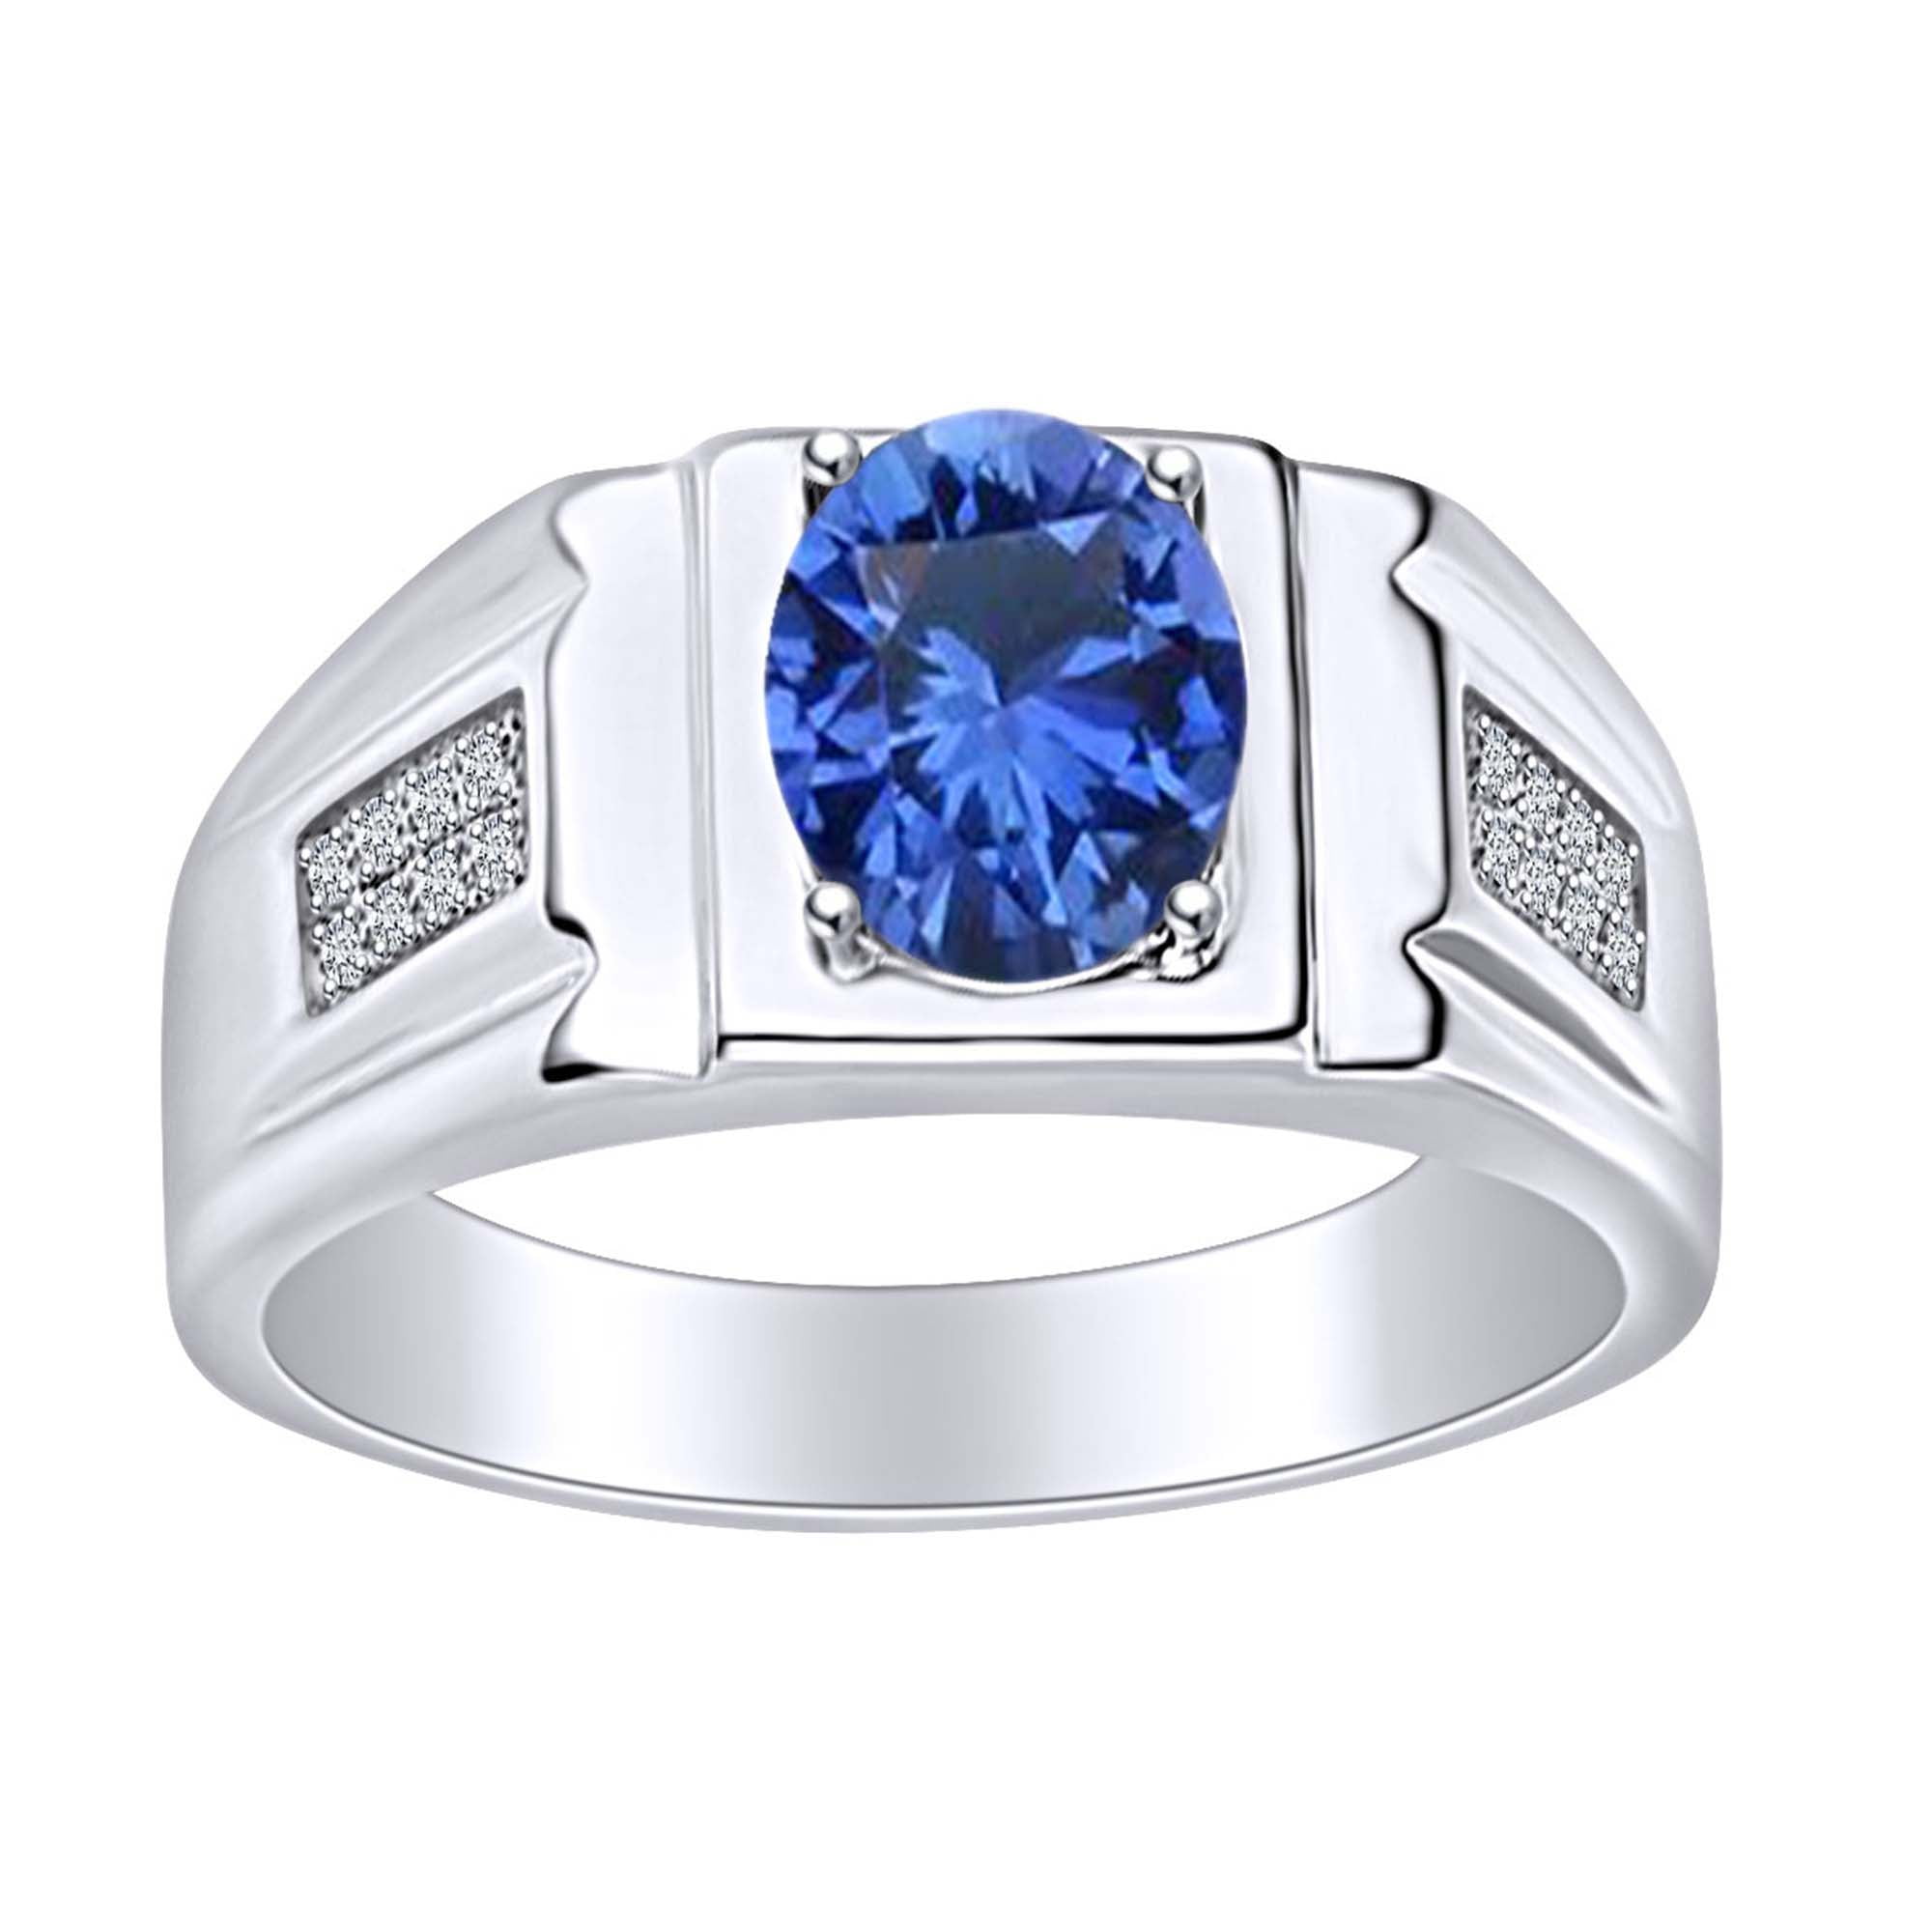 TVS-JEWELS 925 Sterling Silver Prong Set Round Cut Blue Sapphire Anniversary Wedding Band Ring Mens